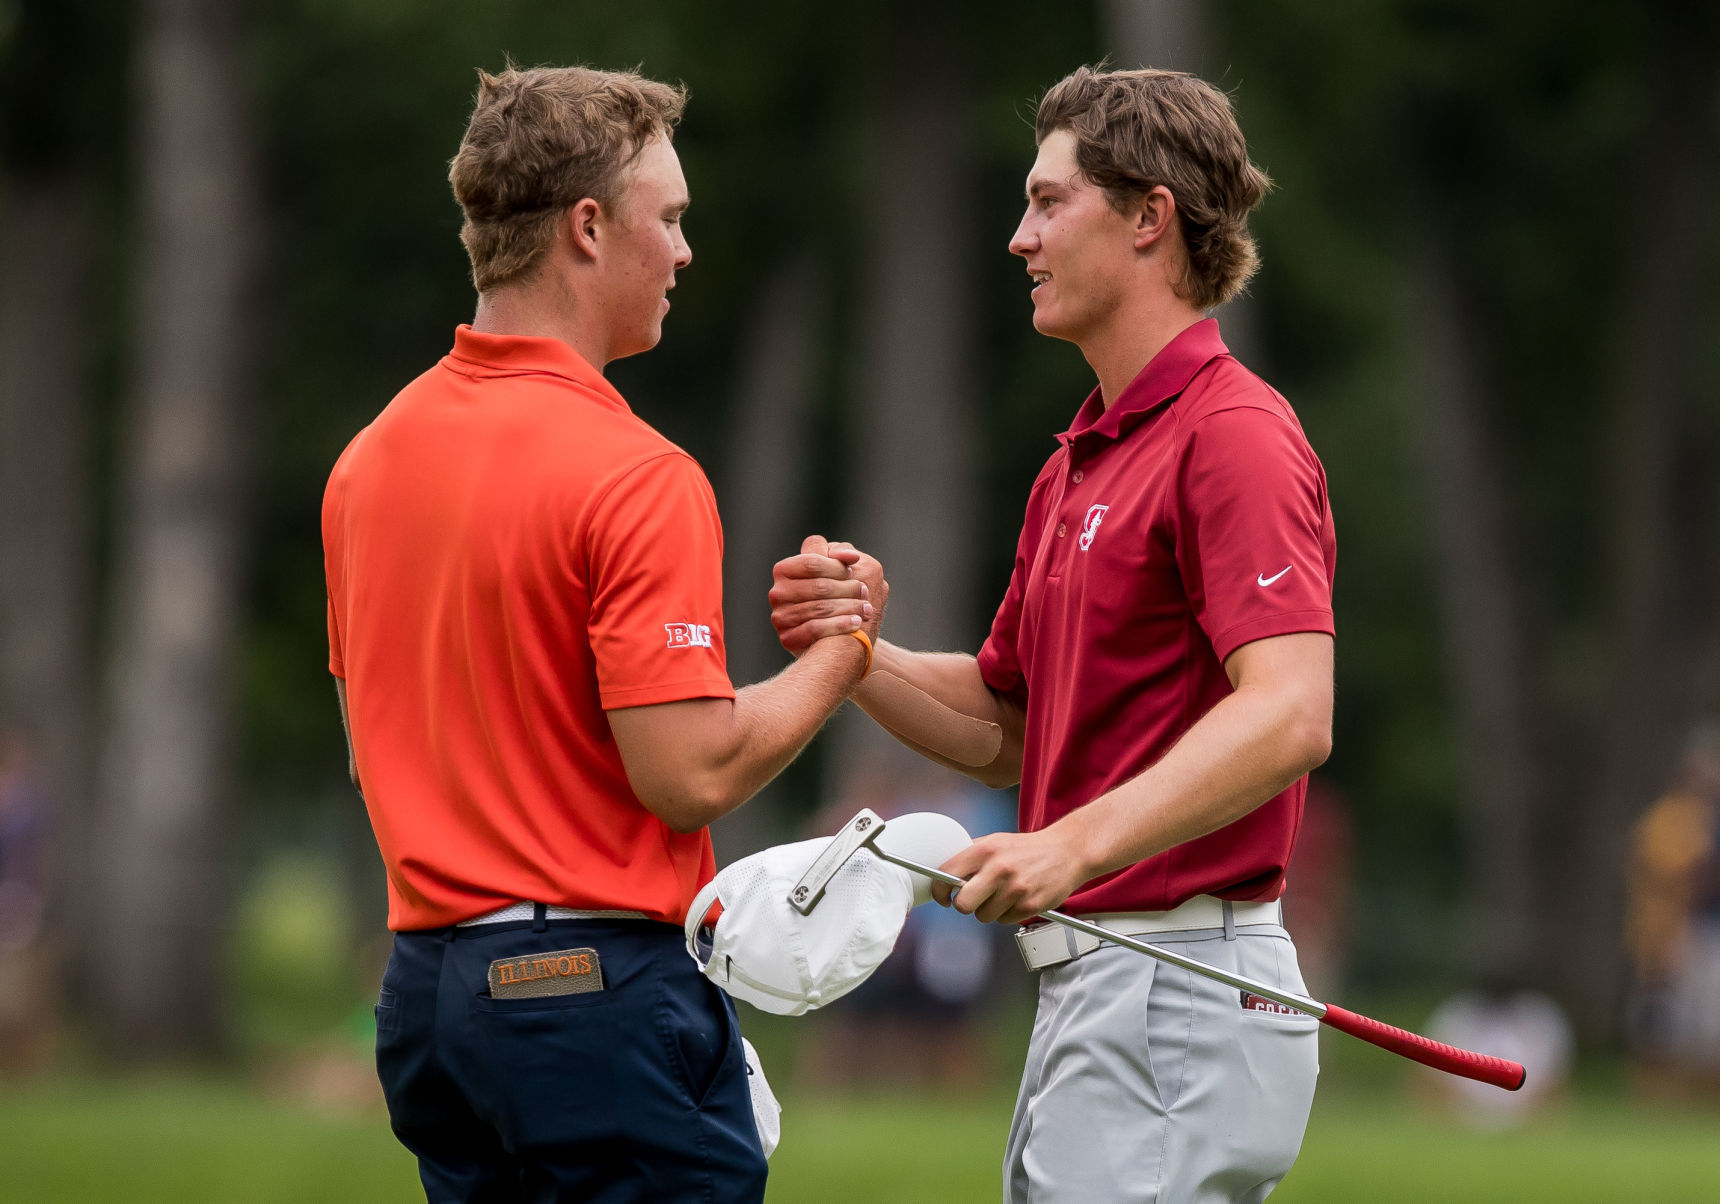 Special weekend for amateur duo Hardy, McNealy pic